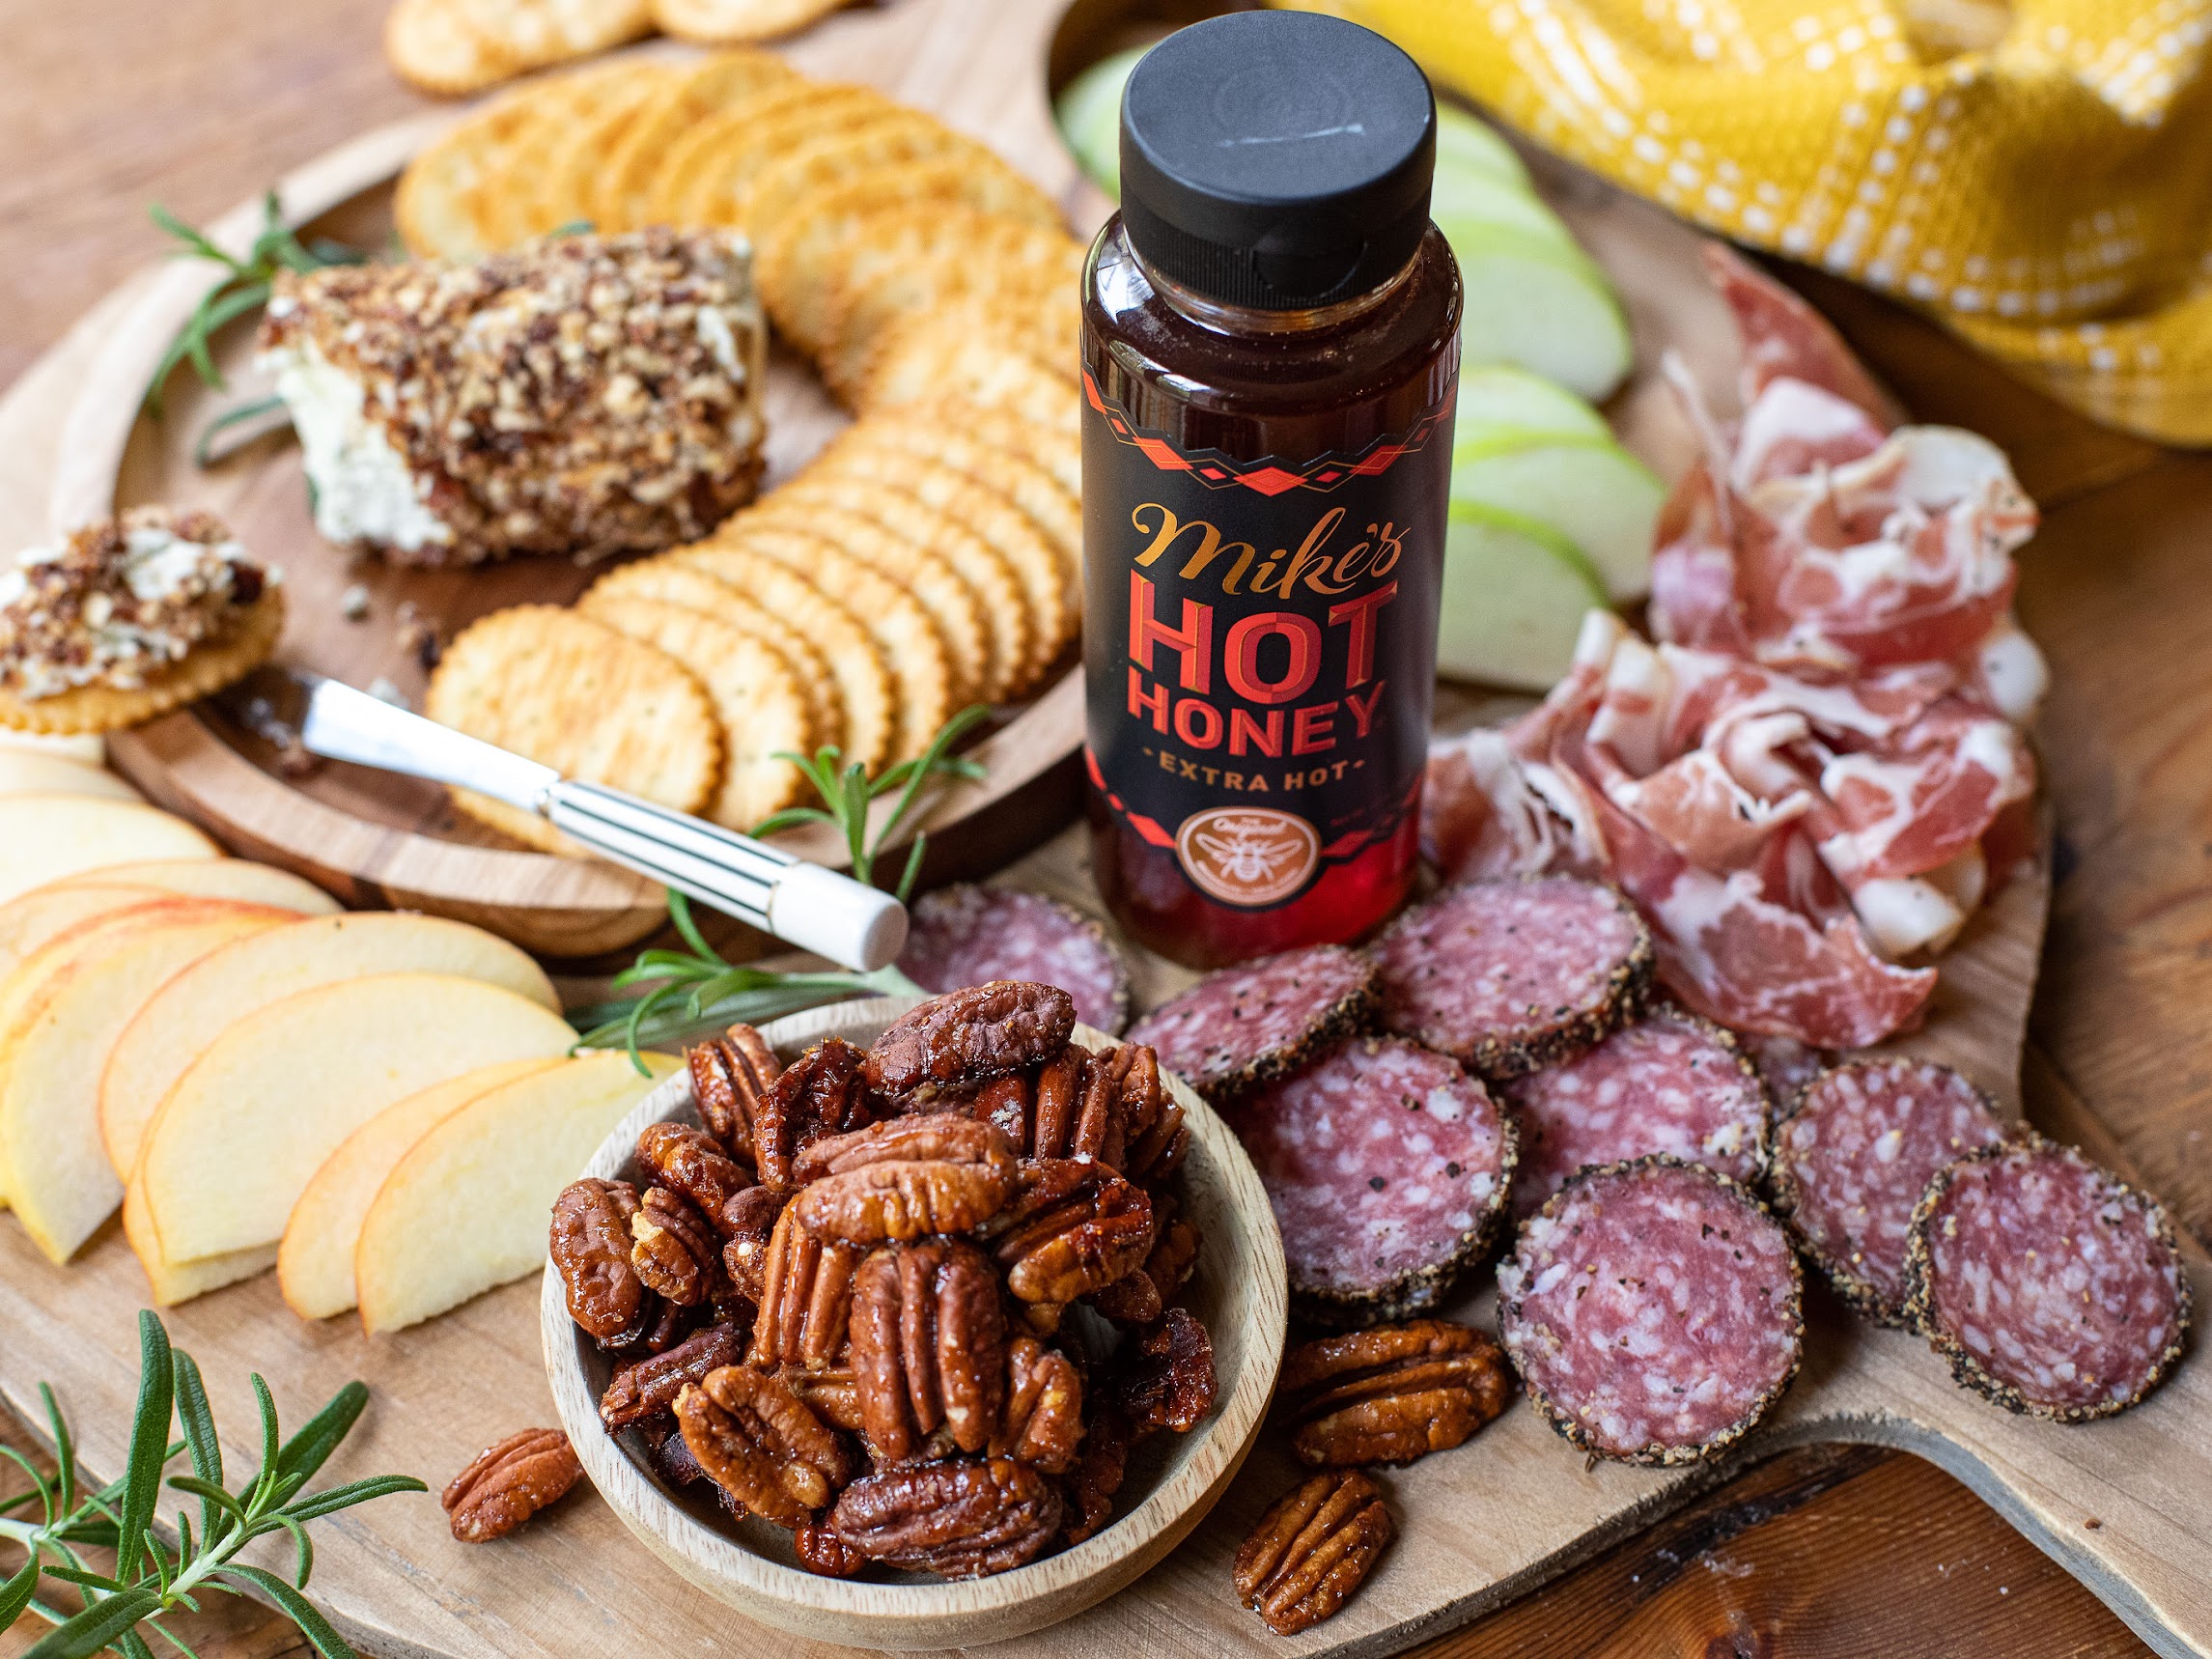 Add Big Flavor To Your Holiday Recipes With Mike's Hot Honey - On Sale NOW At Publix on I Heart Publix 1